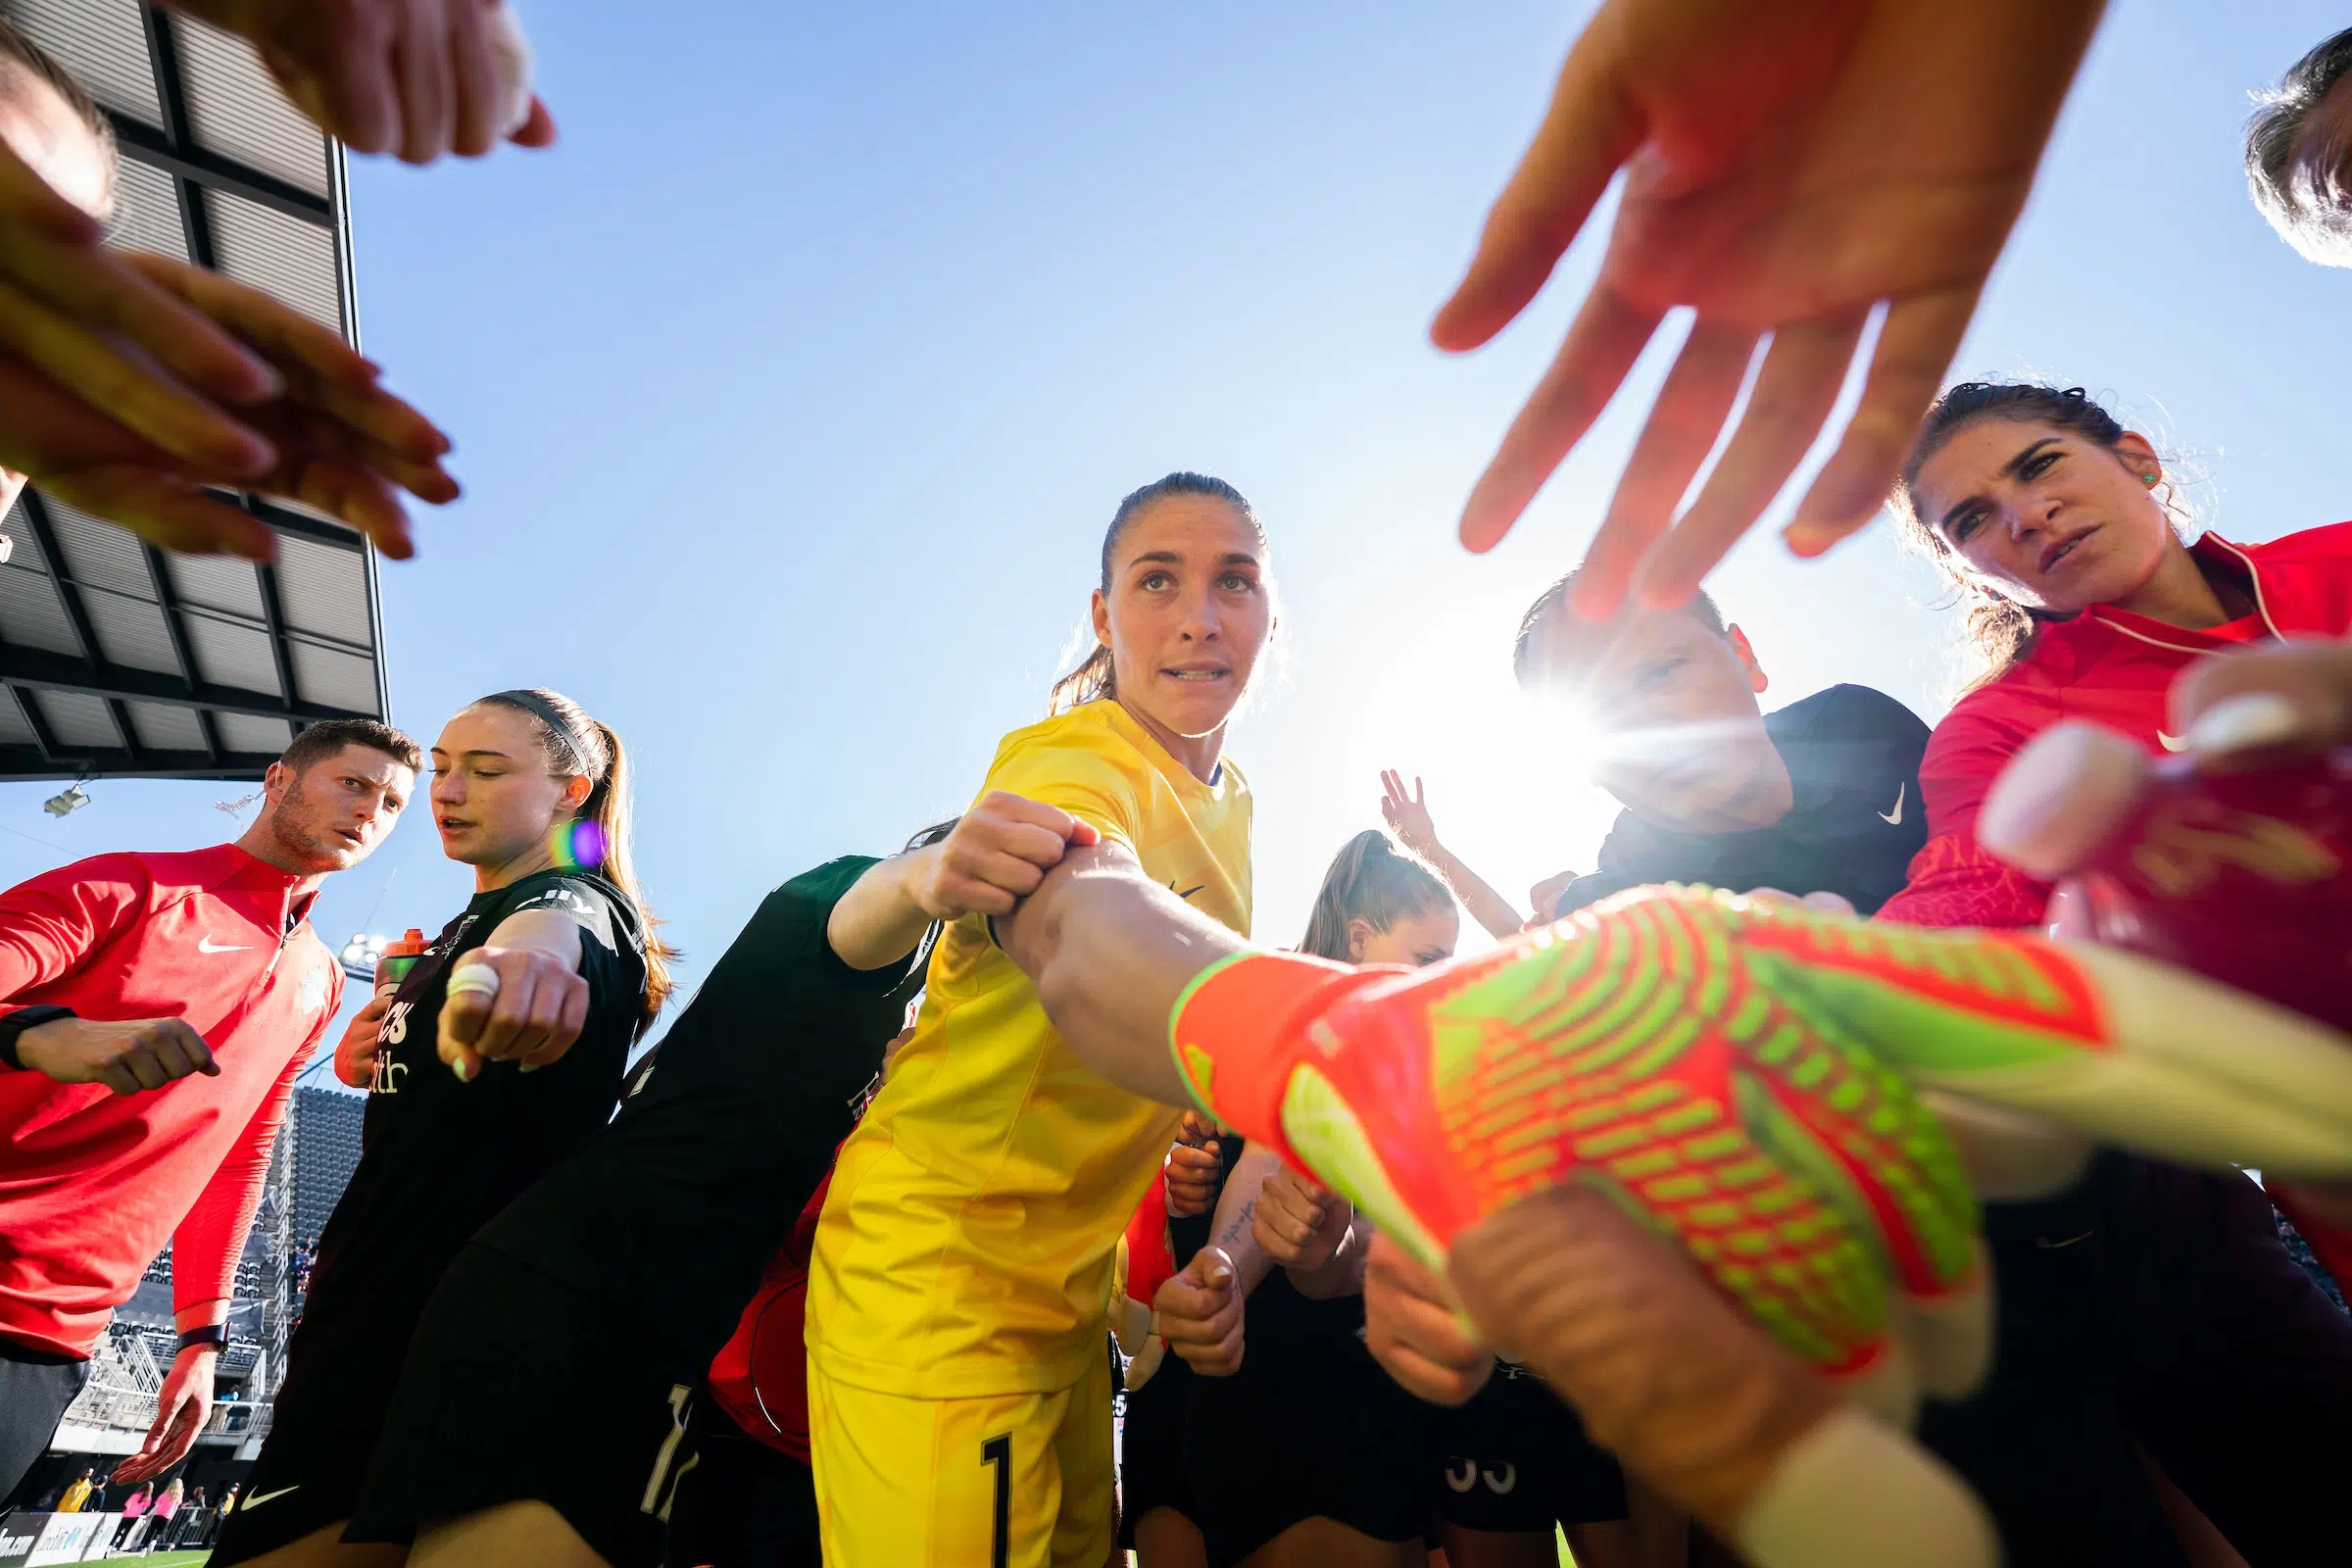 Aubrey Kingsbury in a yellow goalie uniform and neon orange and green gloves puts her hand in a huddle of soccer players.